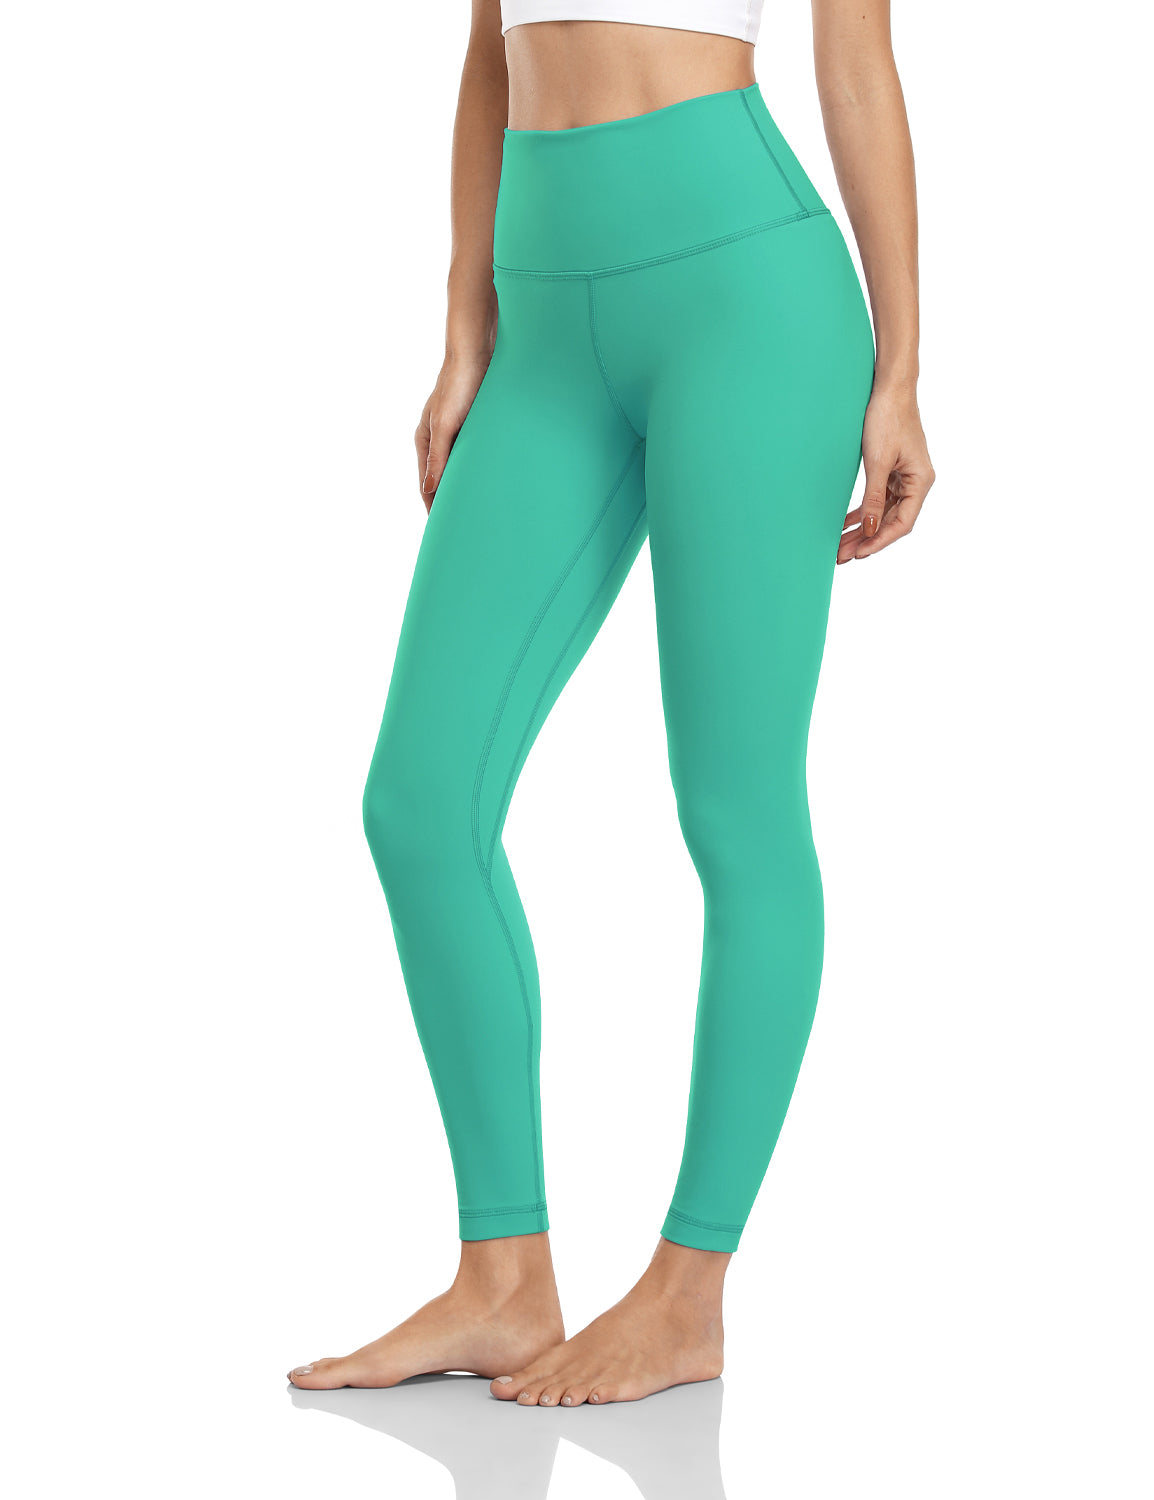  HeyNuts Essential High Waisted Yoga Leggings For Tall Women,  Buttery Soft Full Length Workout Pants 28 Sapphire Blue XS